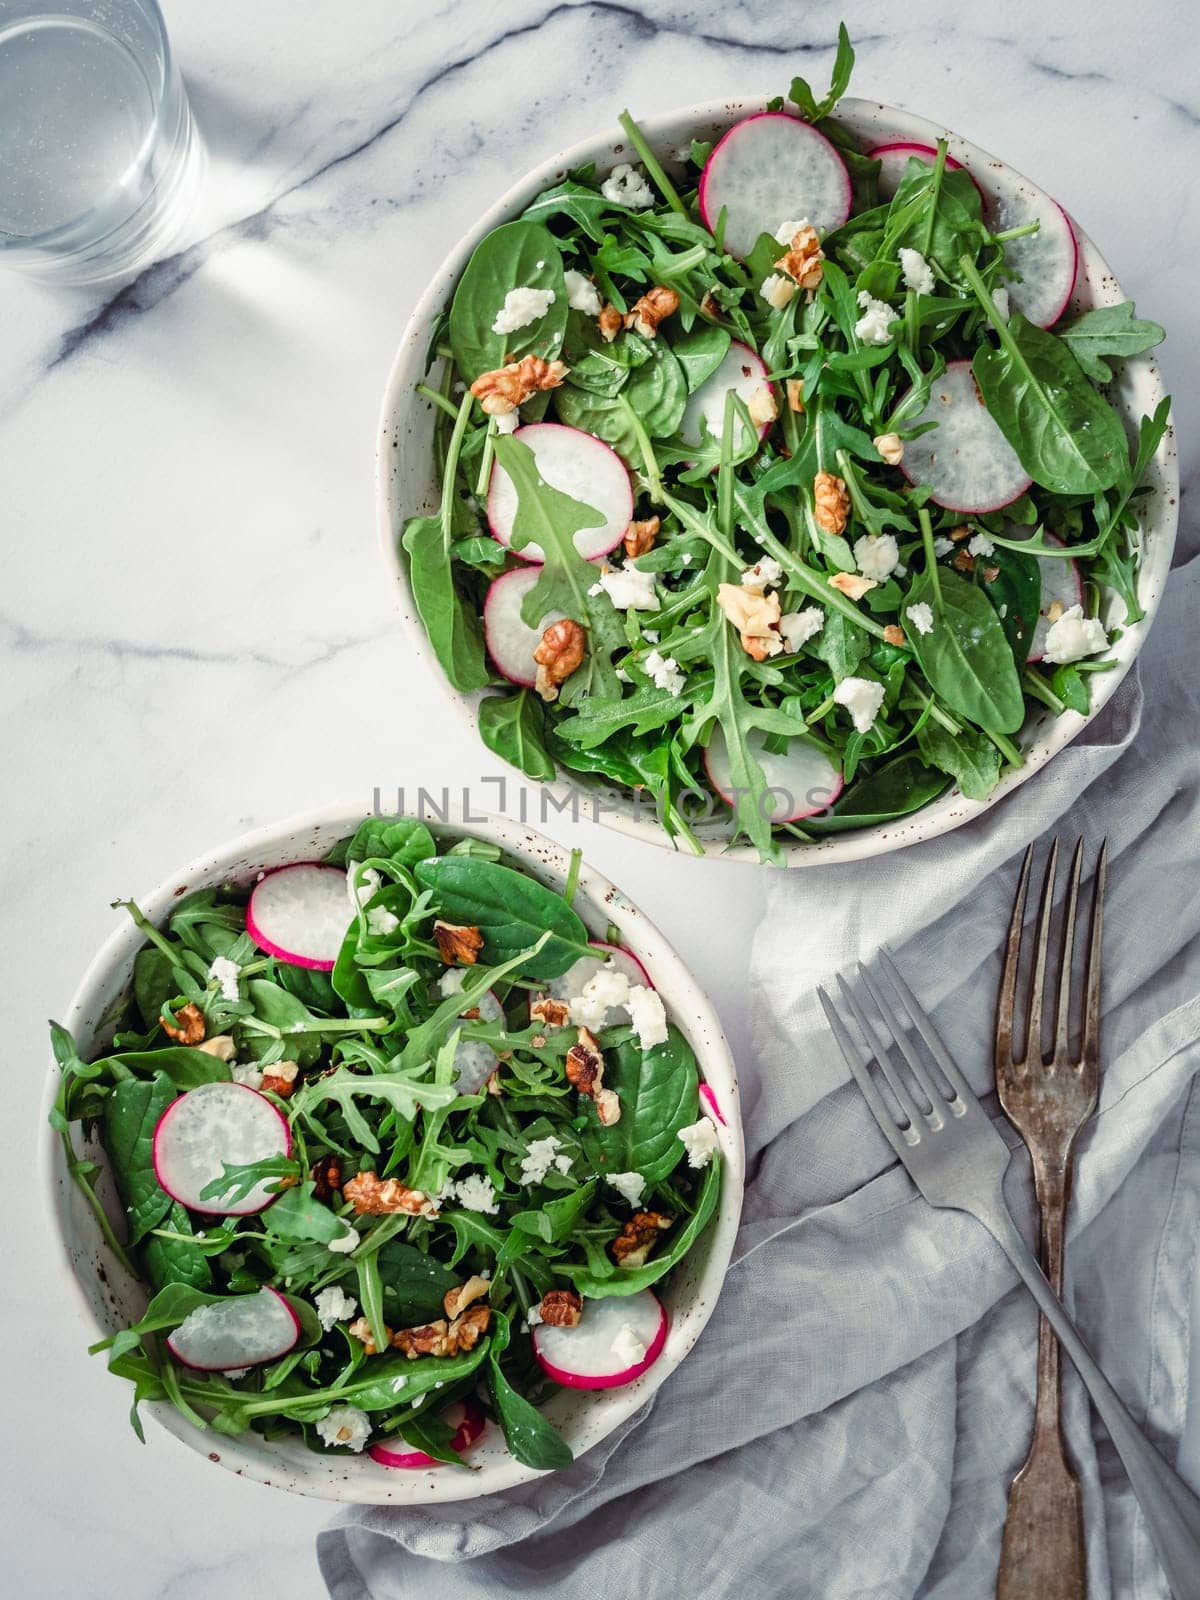 Vegan salad bowl with arugula, spinach, radish, coconut crumble or cottage cheese,walnut.Top view.Vegan breakfast, vegetarian food, diet concept. Two bowls with salad on white marble tabletop.Vertical